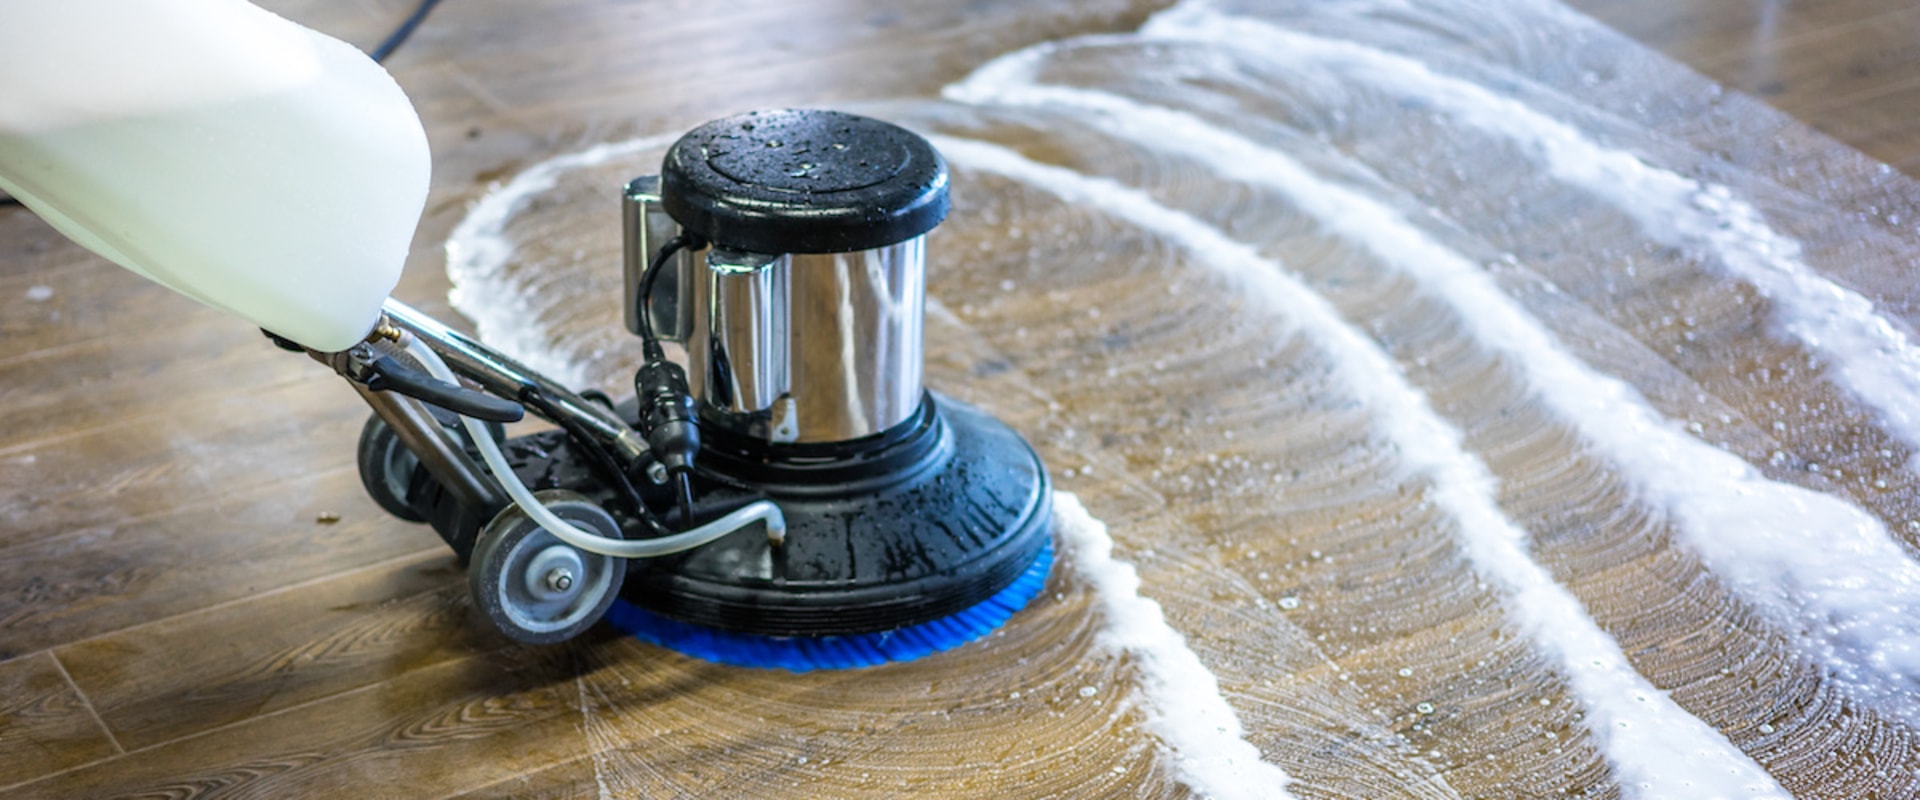 Everything You Need to Know About Floor Wax: A Comprehensive Guide for DIY Wood Floor Cleaners